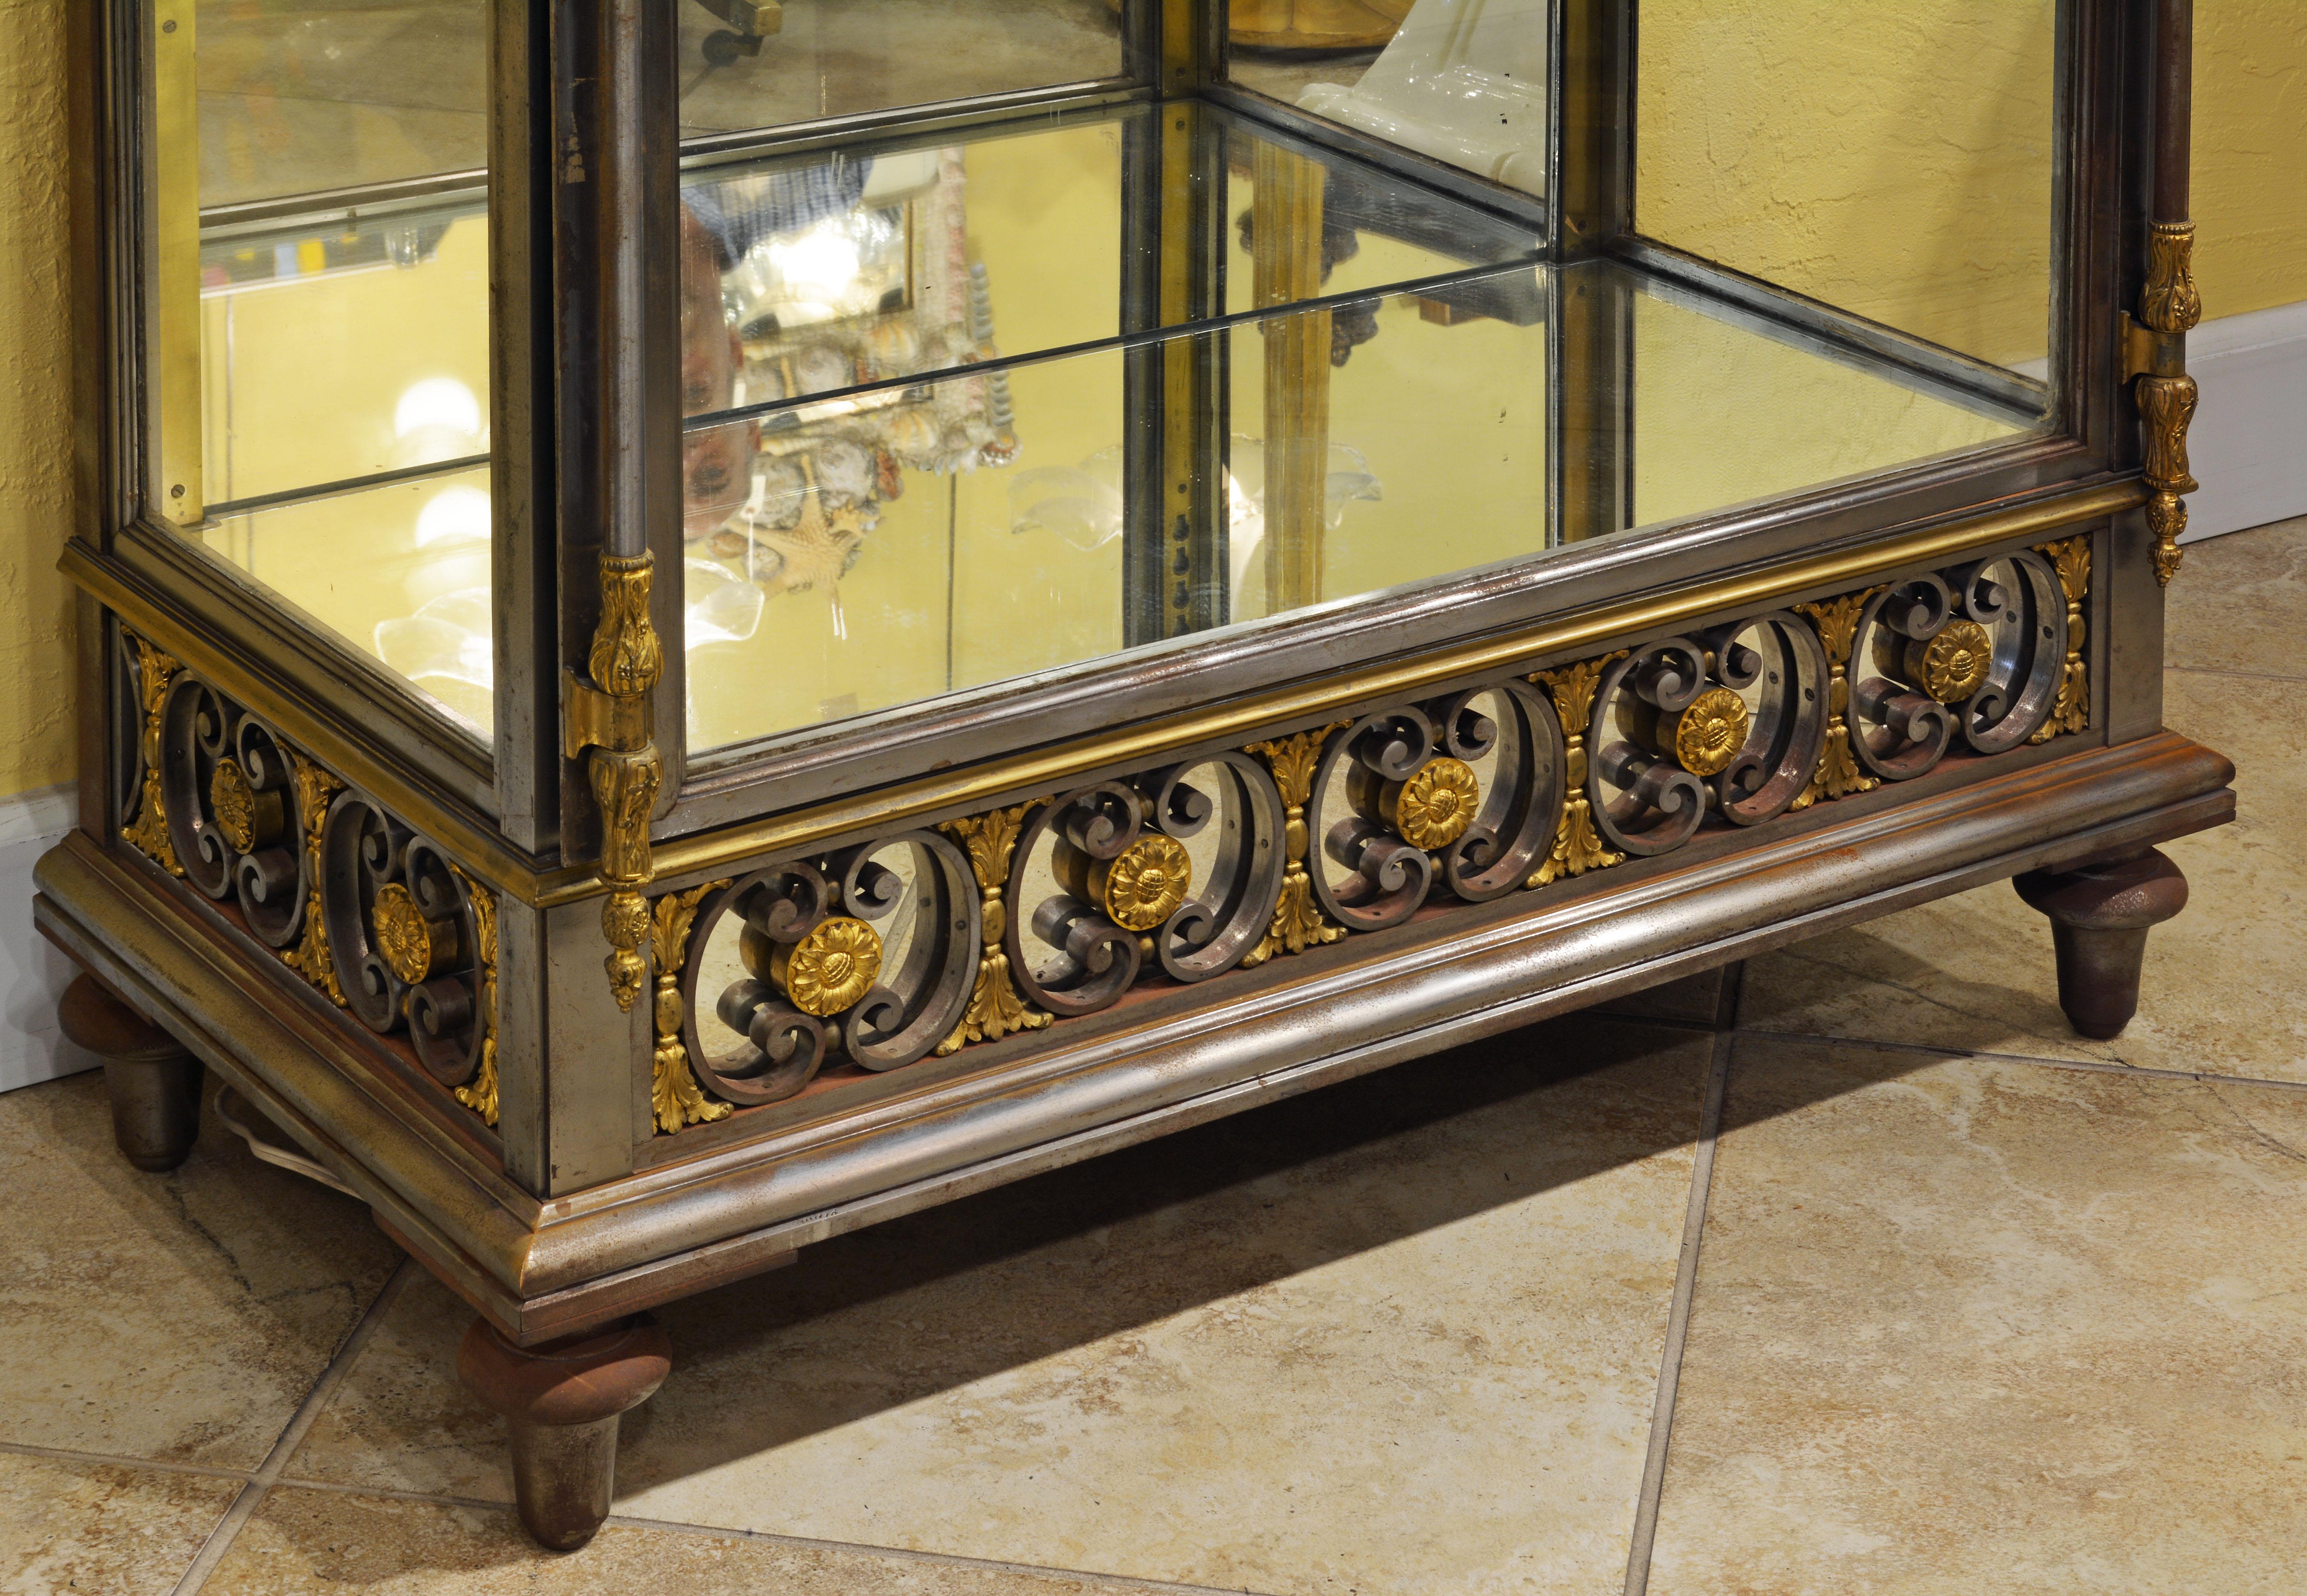 A rare French late 19th century neoclassical gilt bronze, patinated bronze, brushed steel and glass curio cabinet or vitrine combining greco-roman and Louis XVI design elements. The door opens up to an interior with shelves and mirrored back and